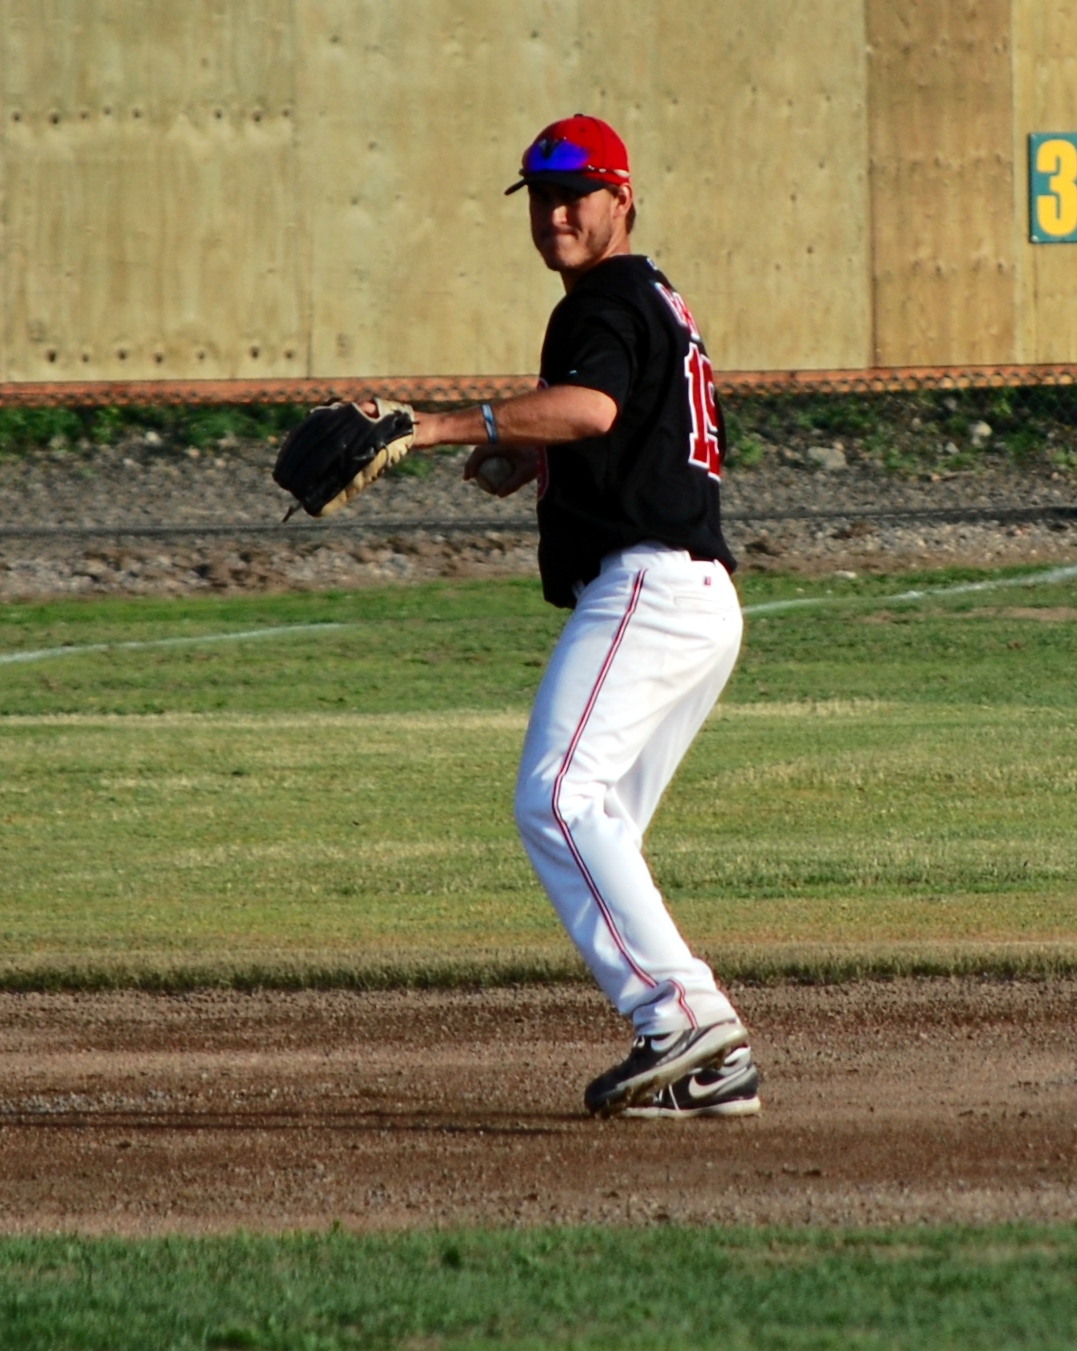 a baseball player standing on the field about to throw